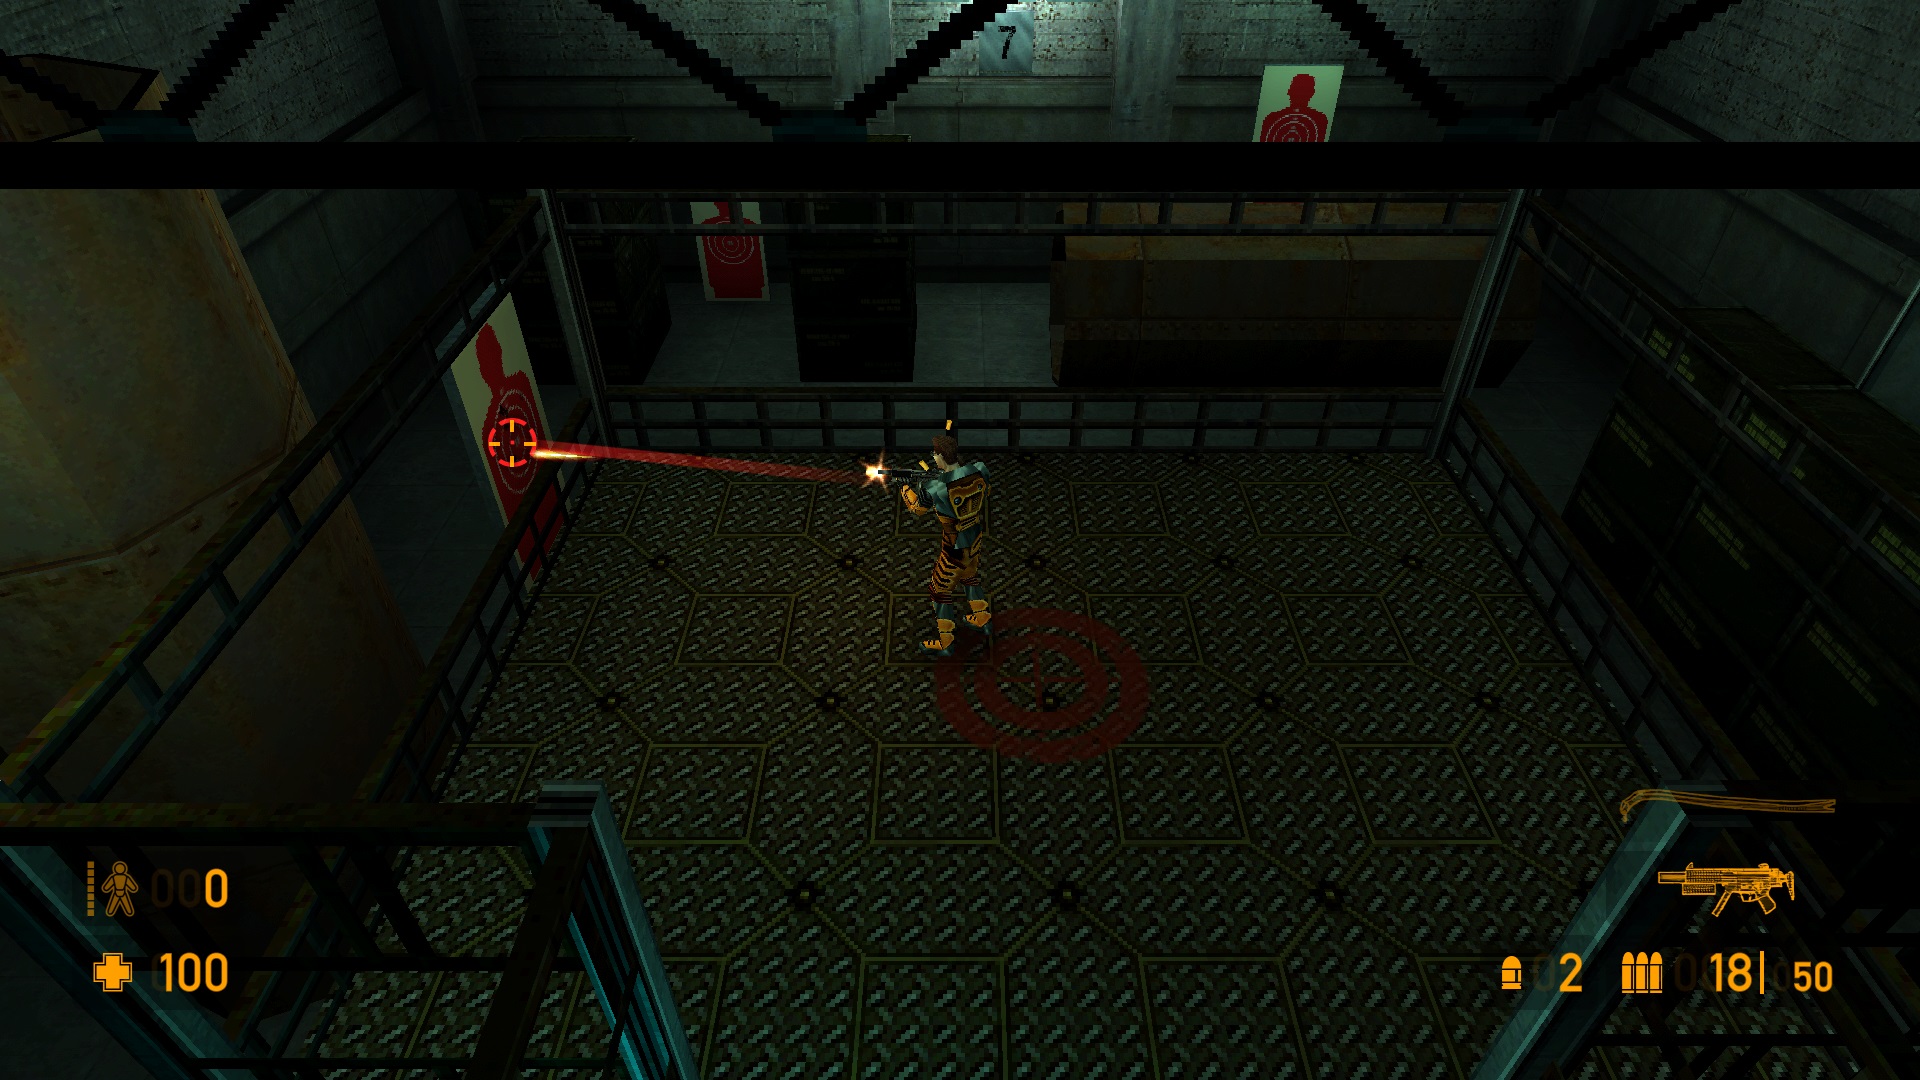 Top down view Gordon Freeman aiming to left at a target with laser pointer indicating his direction.